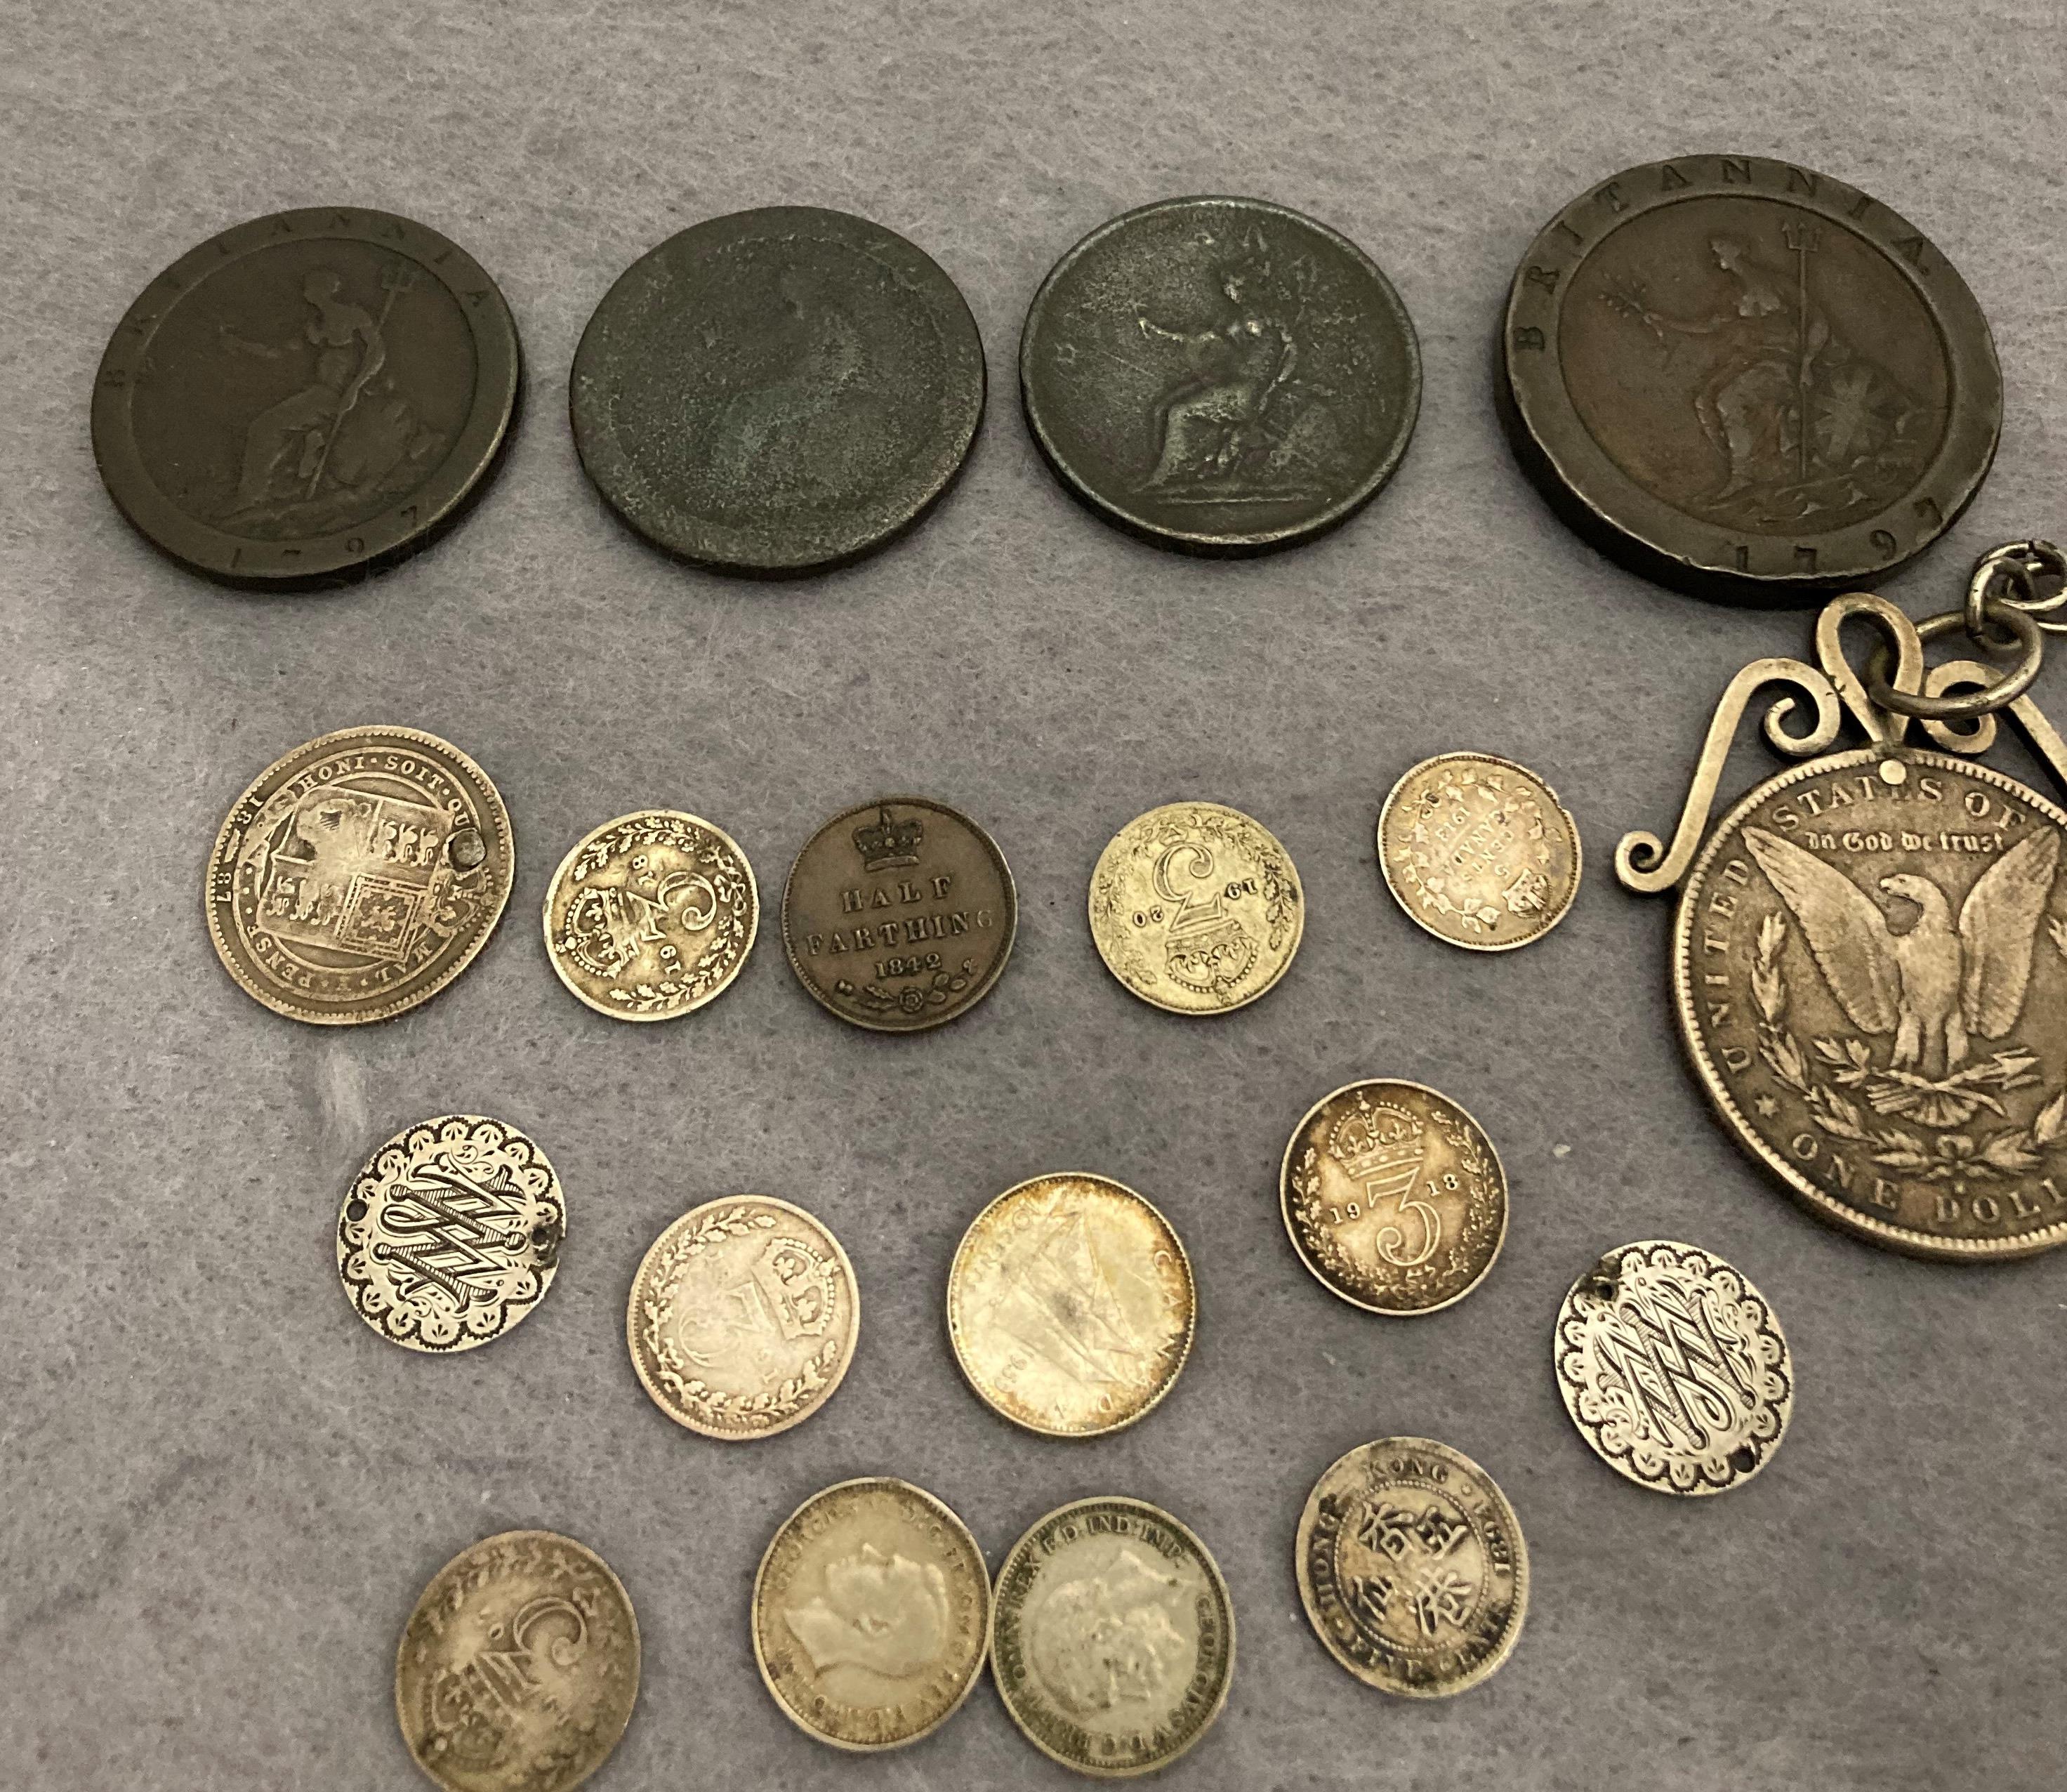 Contents to box - USA 1883 silver US dollar on chain with other silver coins, - Image 4 of 4